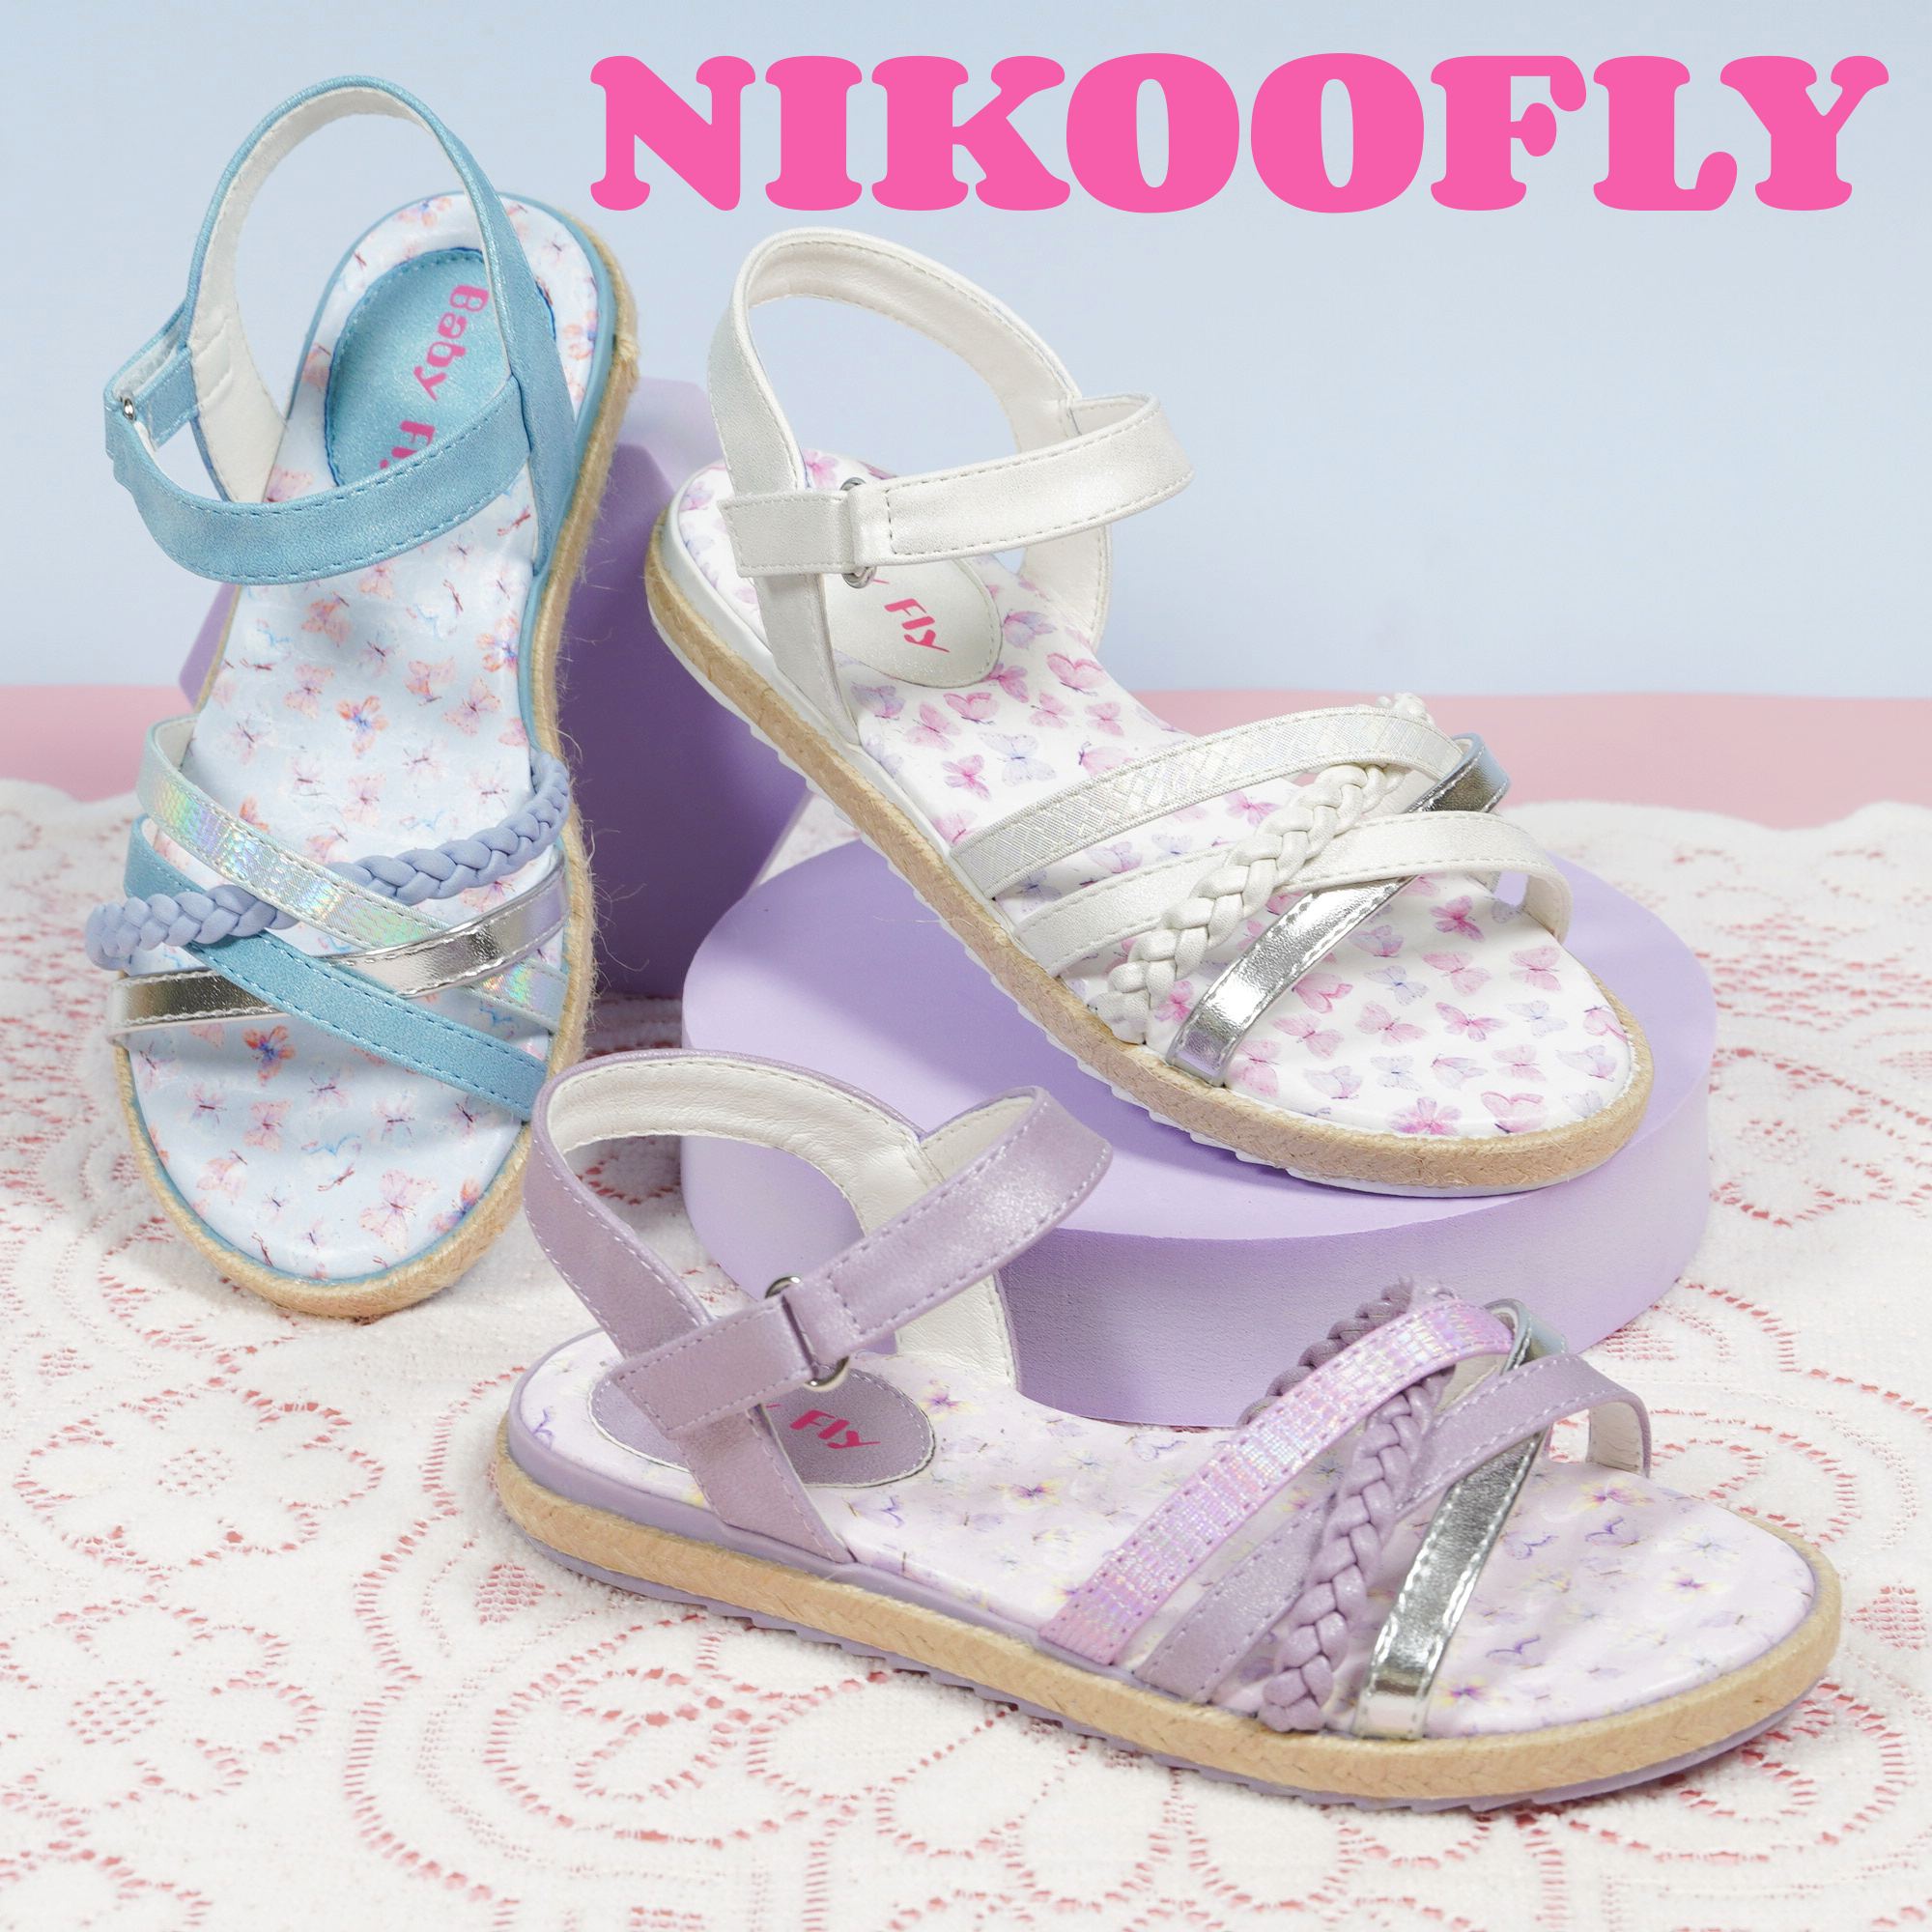 NIKOOFLY-SHANTOU-YIDAXING-New-Arrivals-Girl's-Sweet-Sandals-Good-Quality-Butterfly-Print-Inner-Sandals-YDX0538L-4